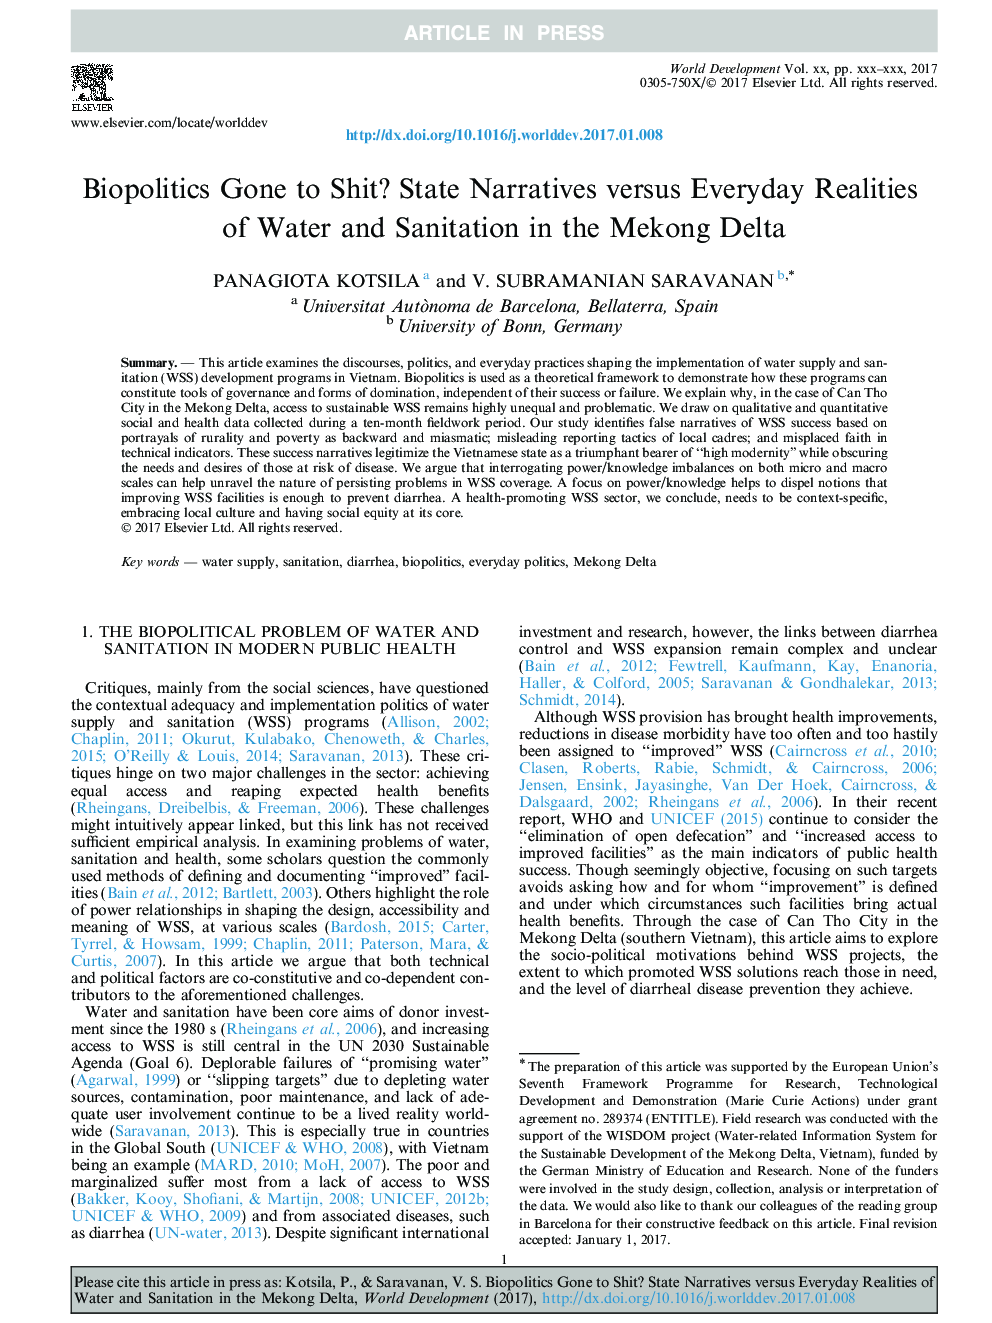 Biopolitics Gone to Shit? State Narratives versus Everyday Realities of Water and Sanitation in the Mekong Delta